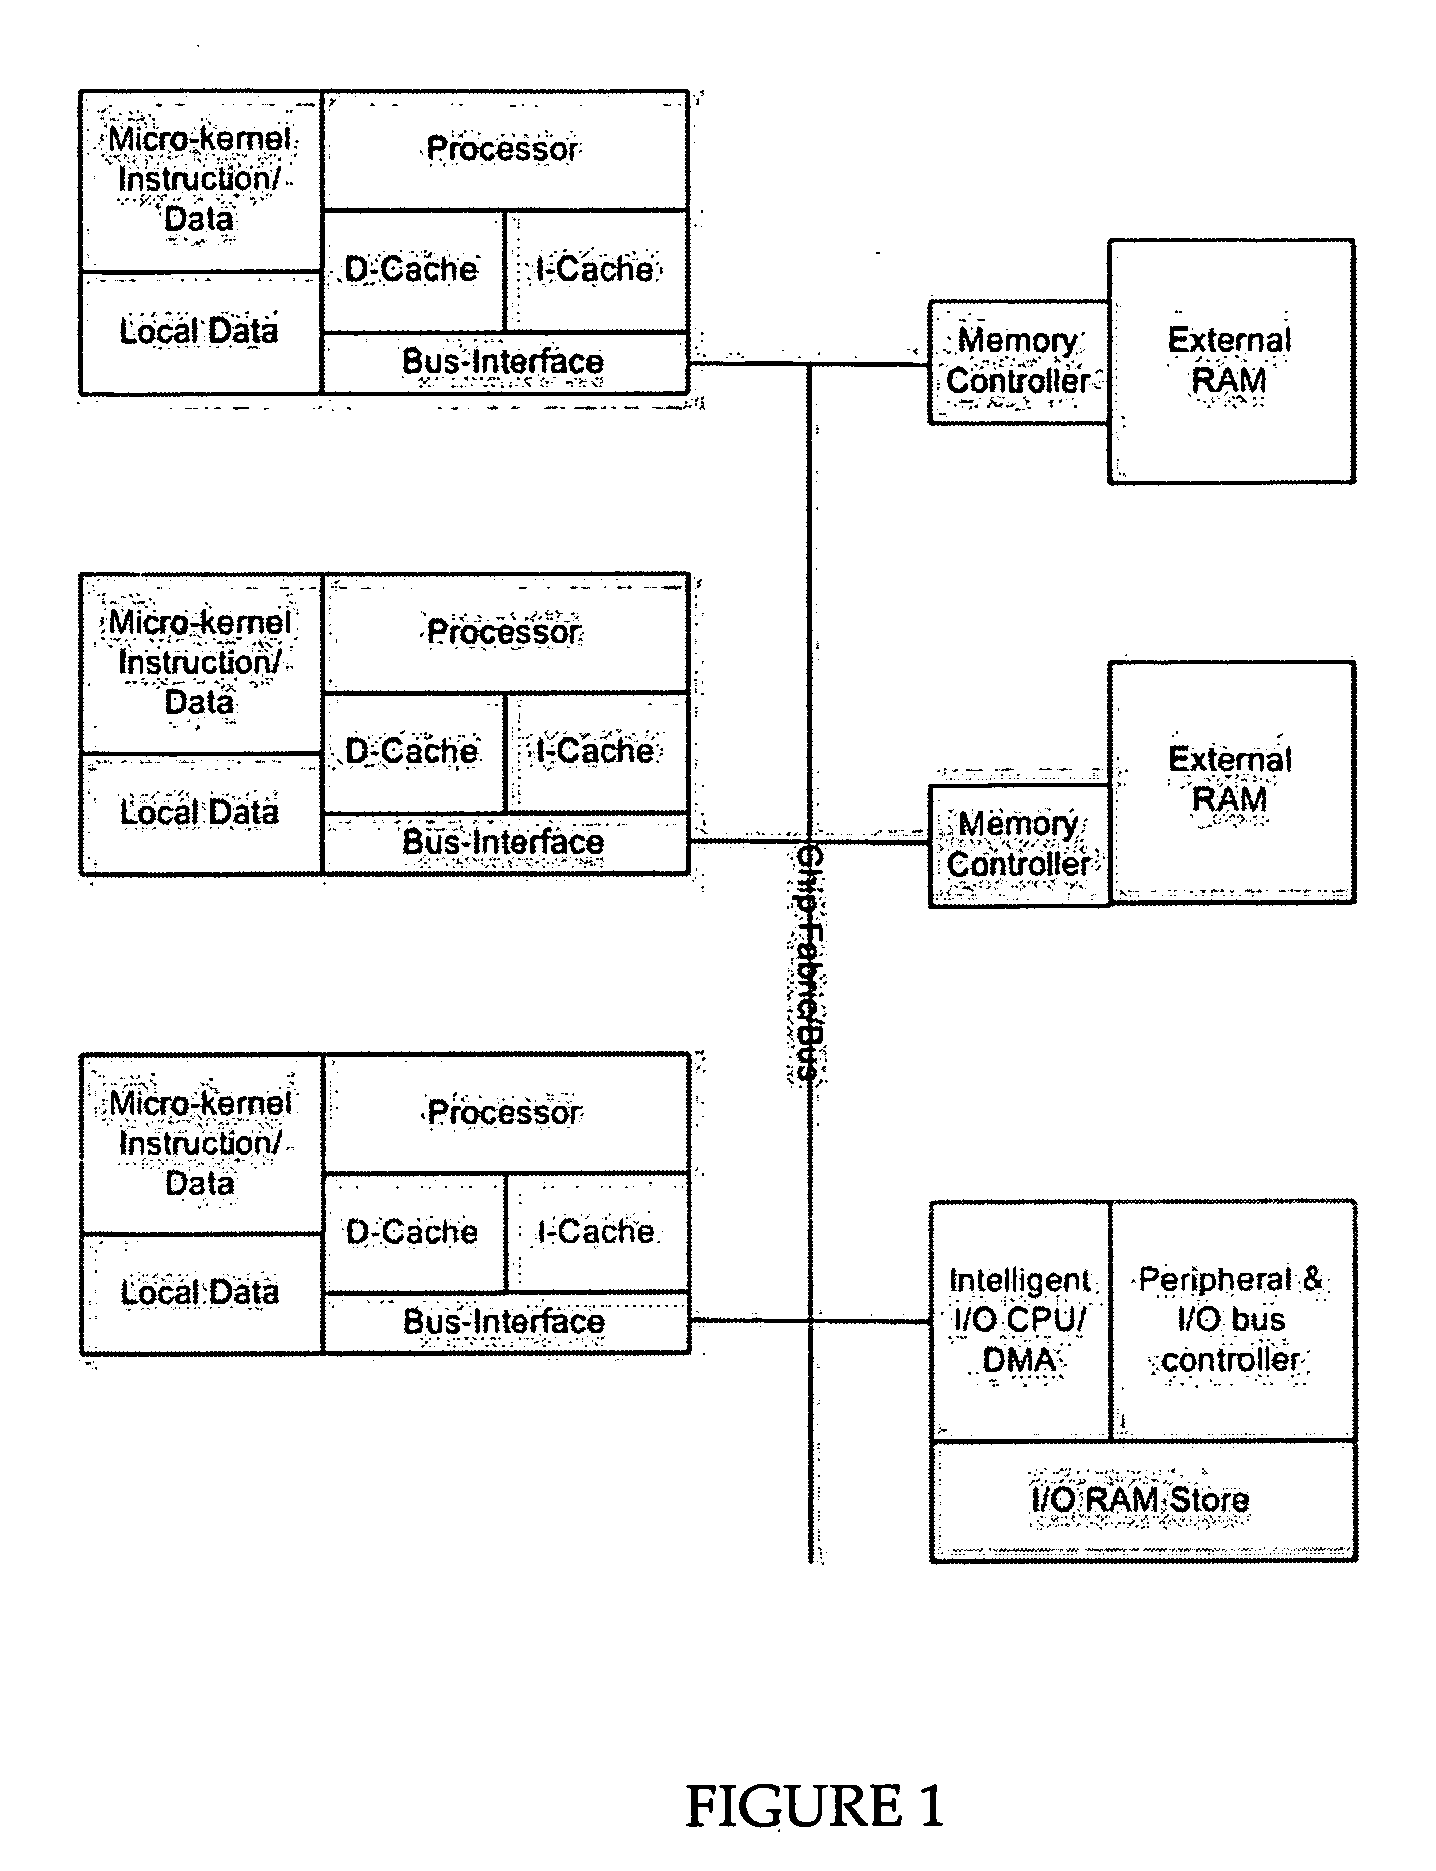 Thread aware distributed software system for a multi-processor